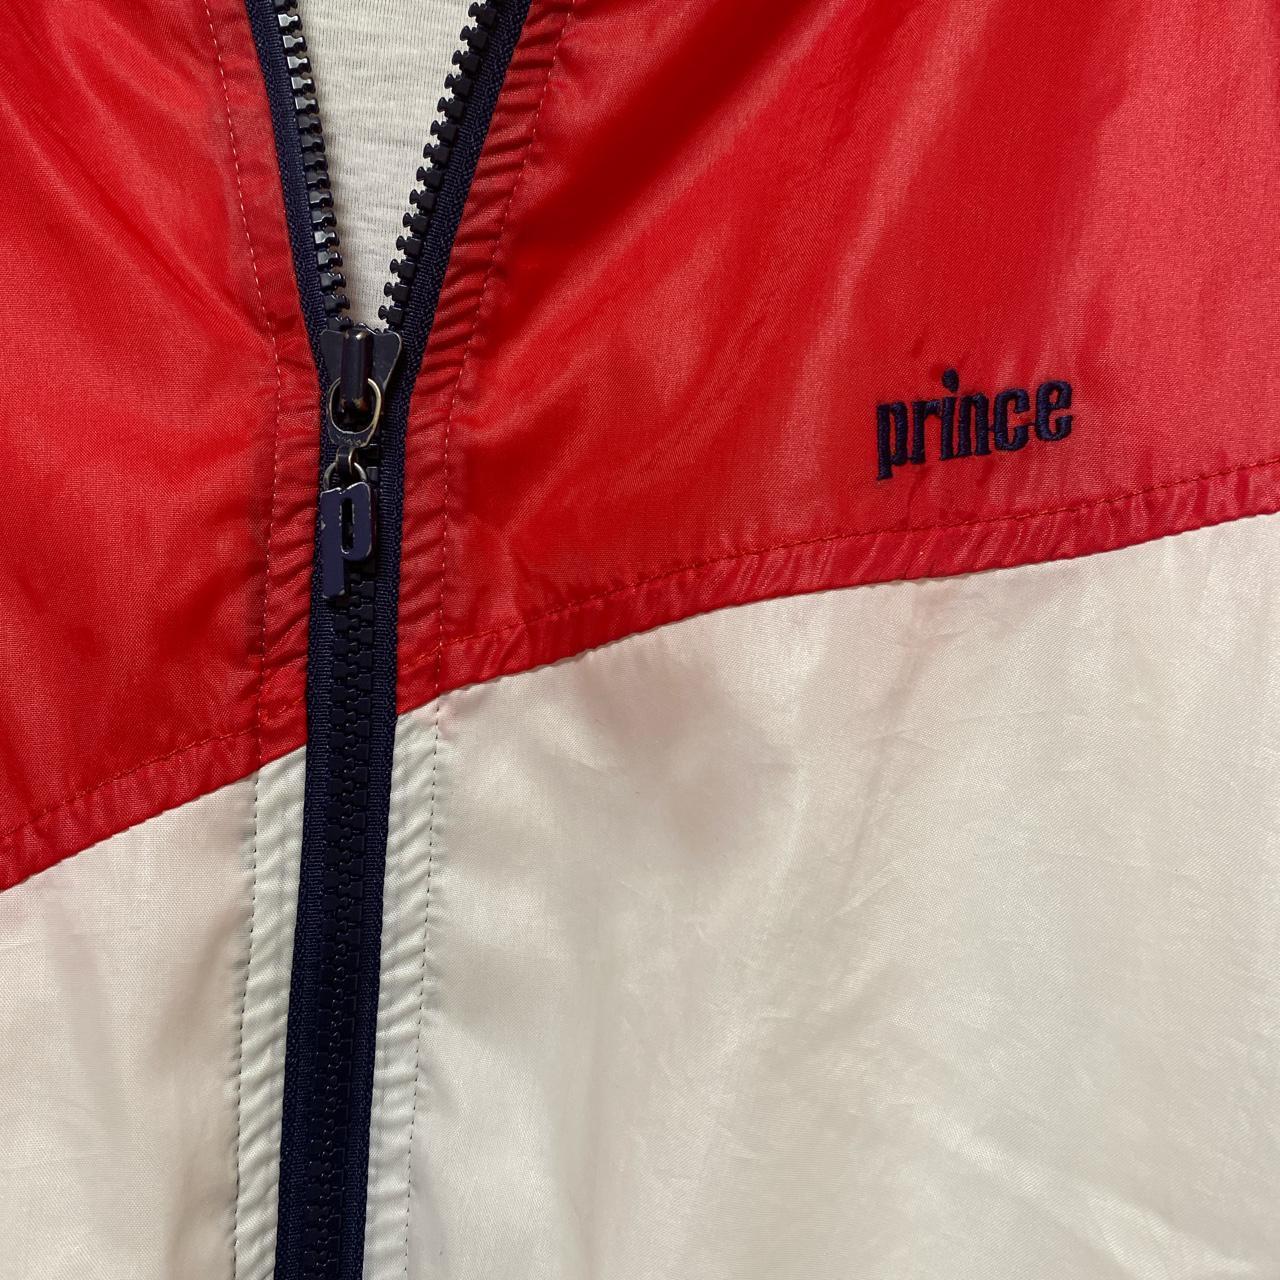 Prince Men's Blue and Red Jacket (4)